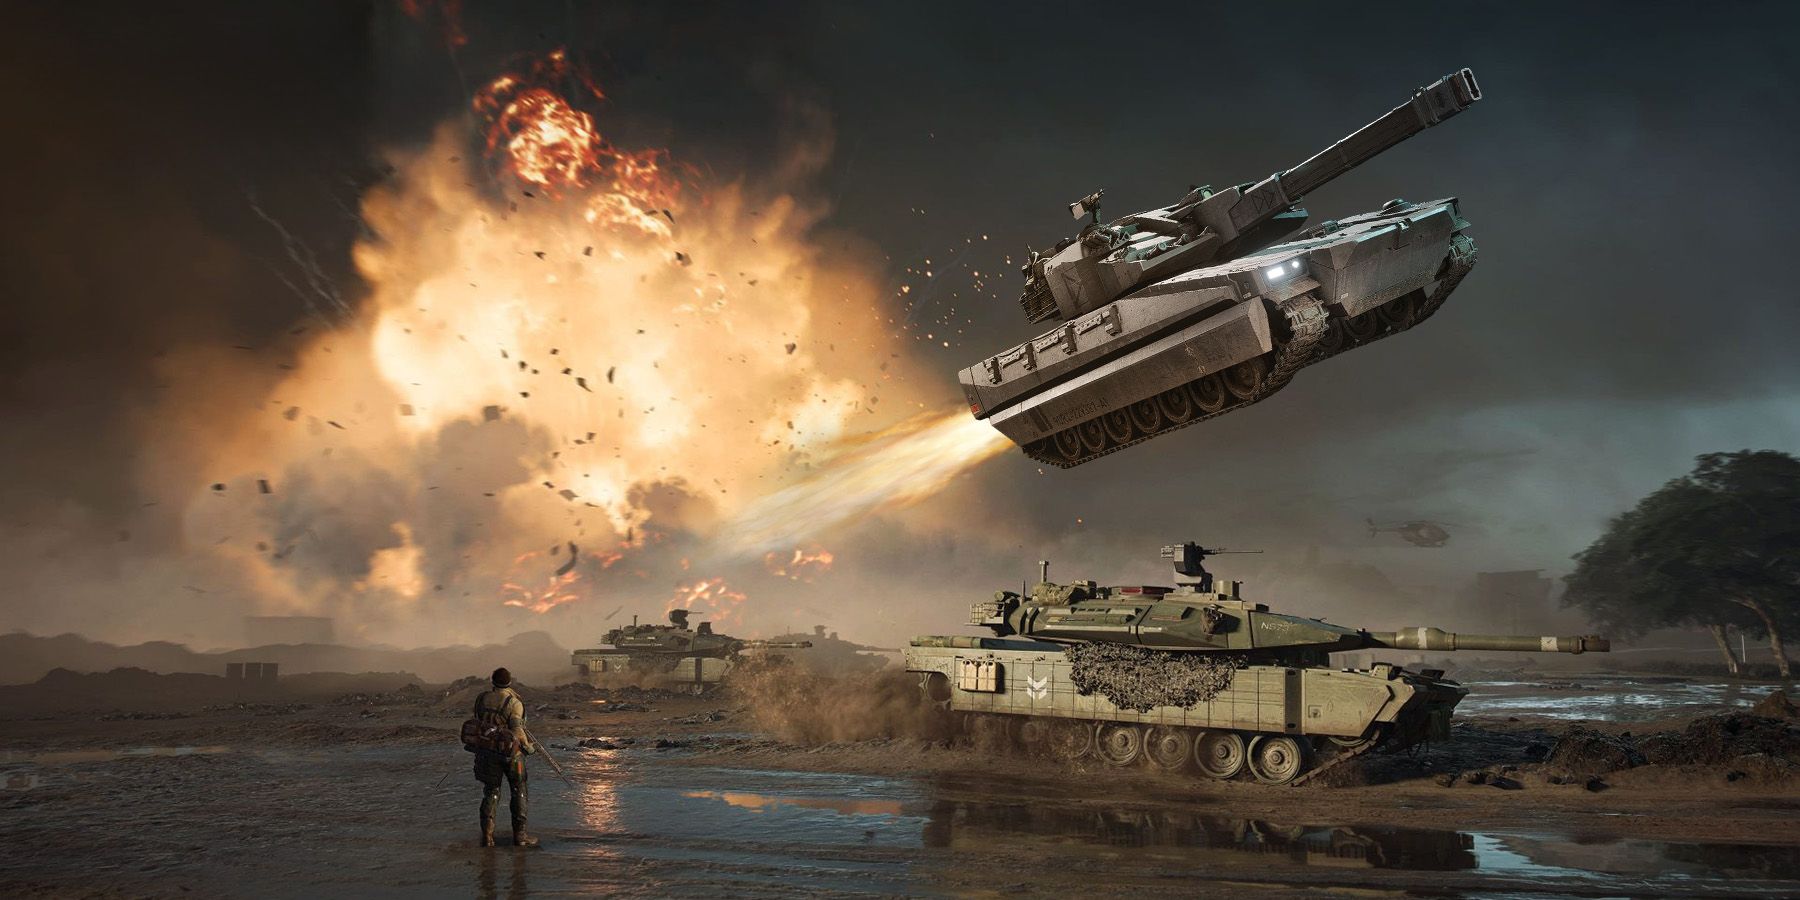 creative-battlefield-2042-player-turns-tank-into-a-missle-game-rant